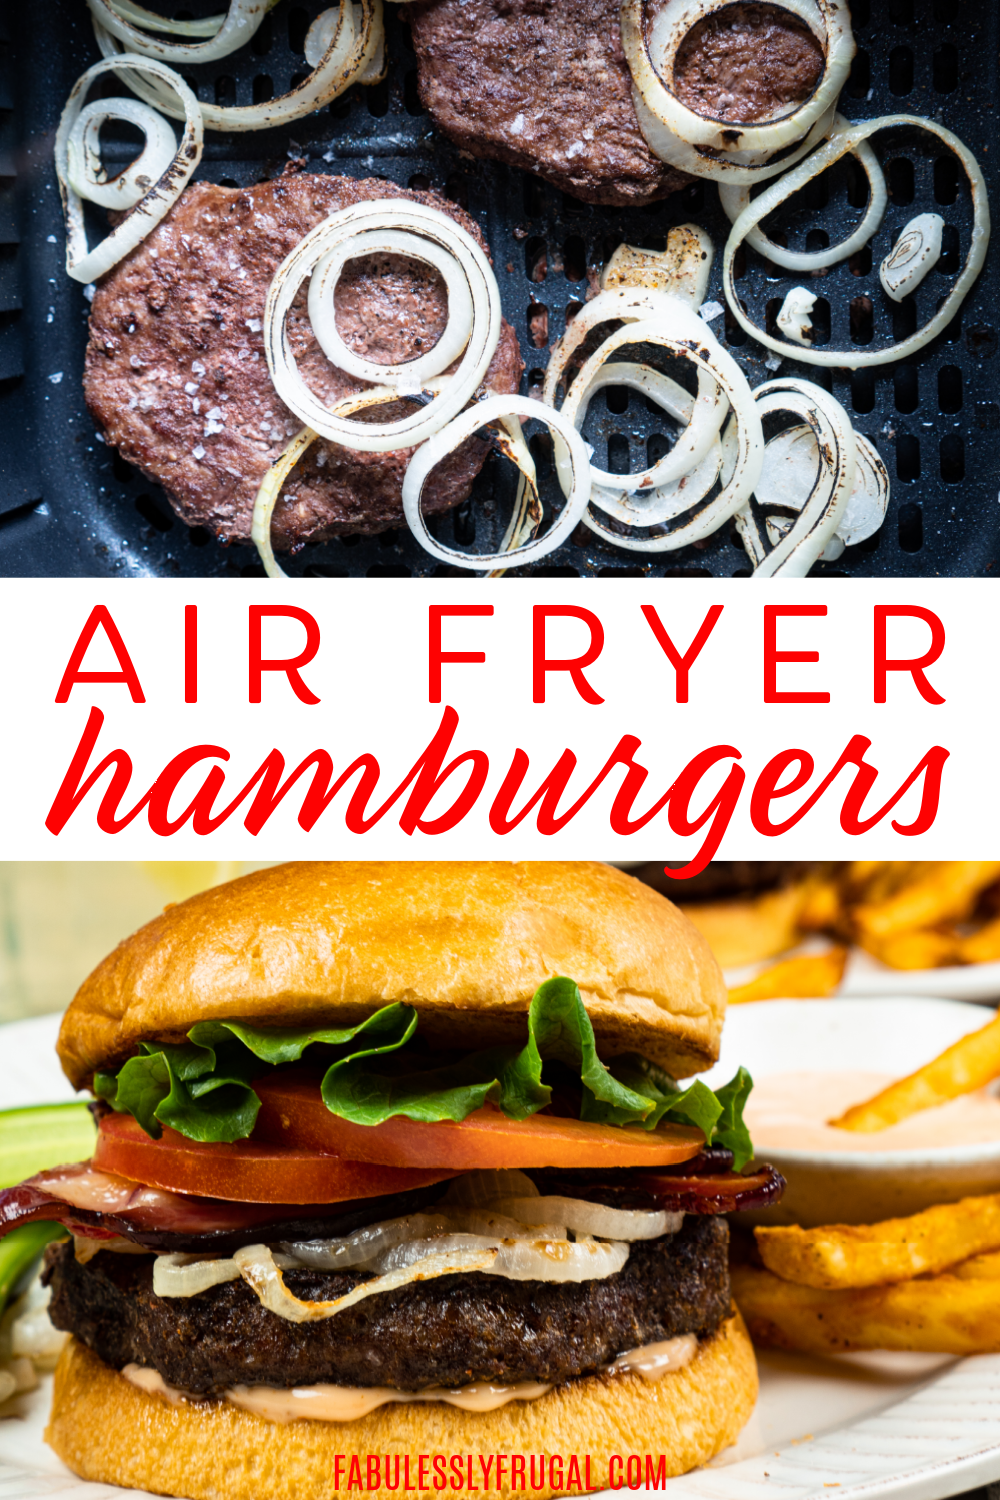 From froze to fresh, you will love these air fryer hamburgers anytime of the year